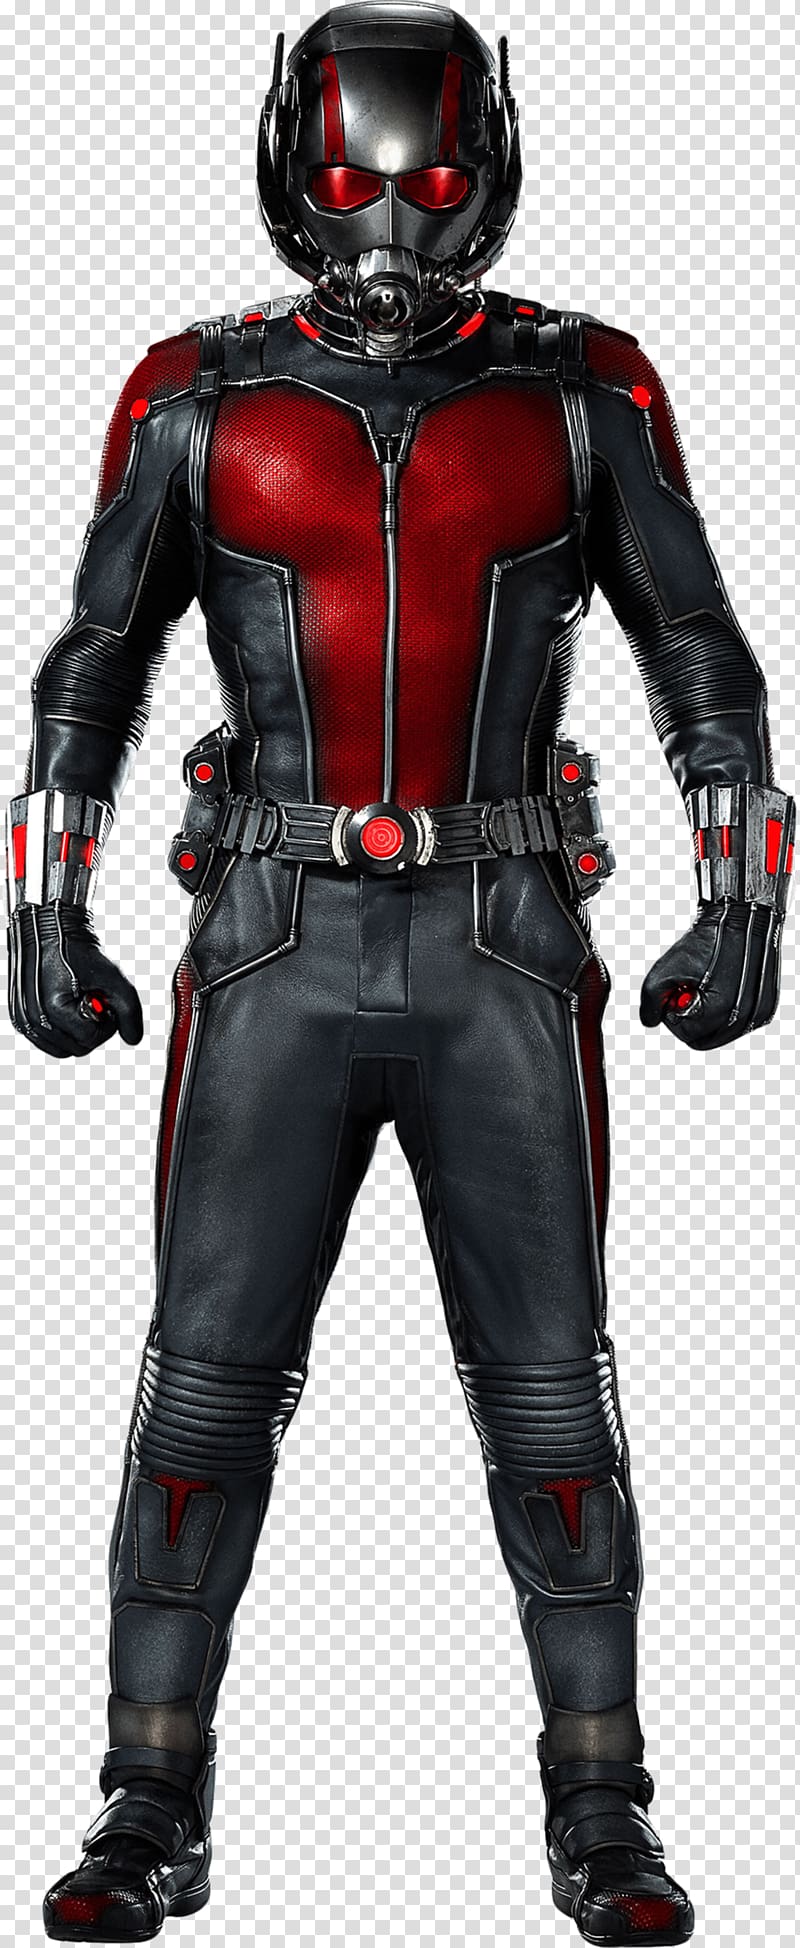 Hank Pym Wasp Ant-Man Marvel Cinematic Universe, Ant Man chibi transparent background PNG clipart